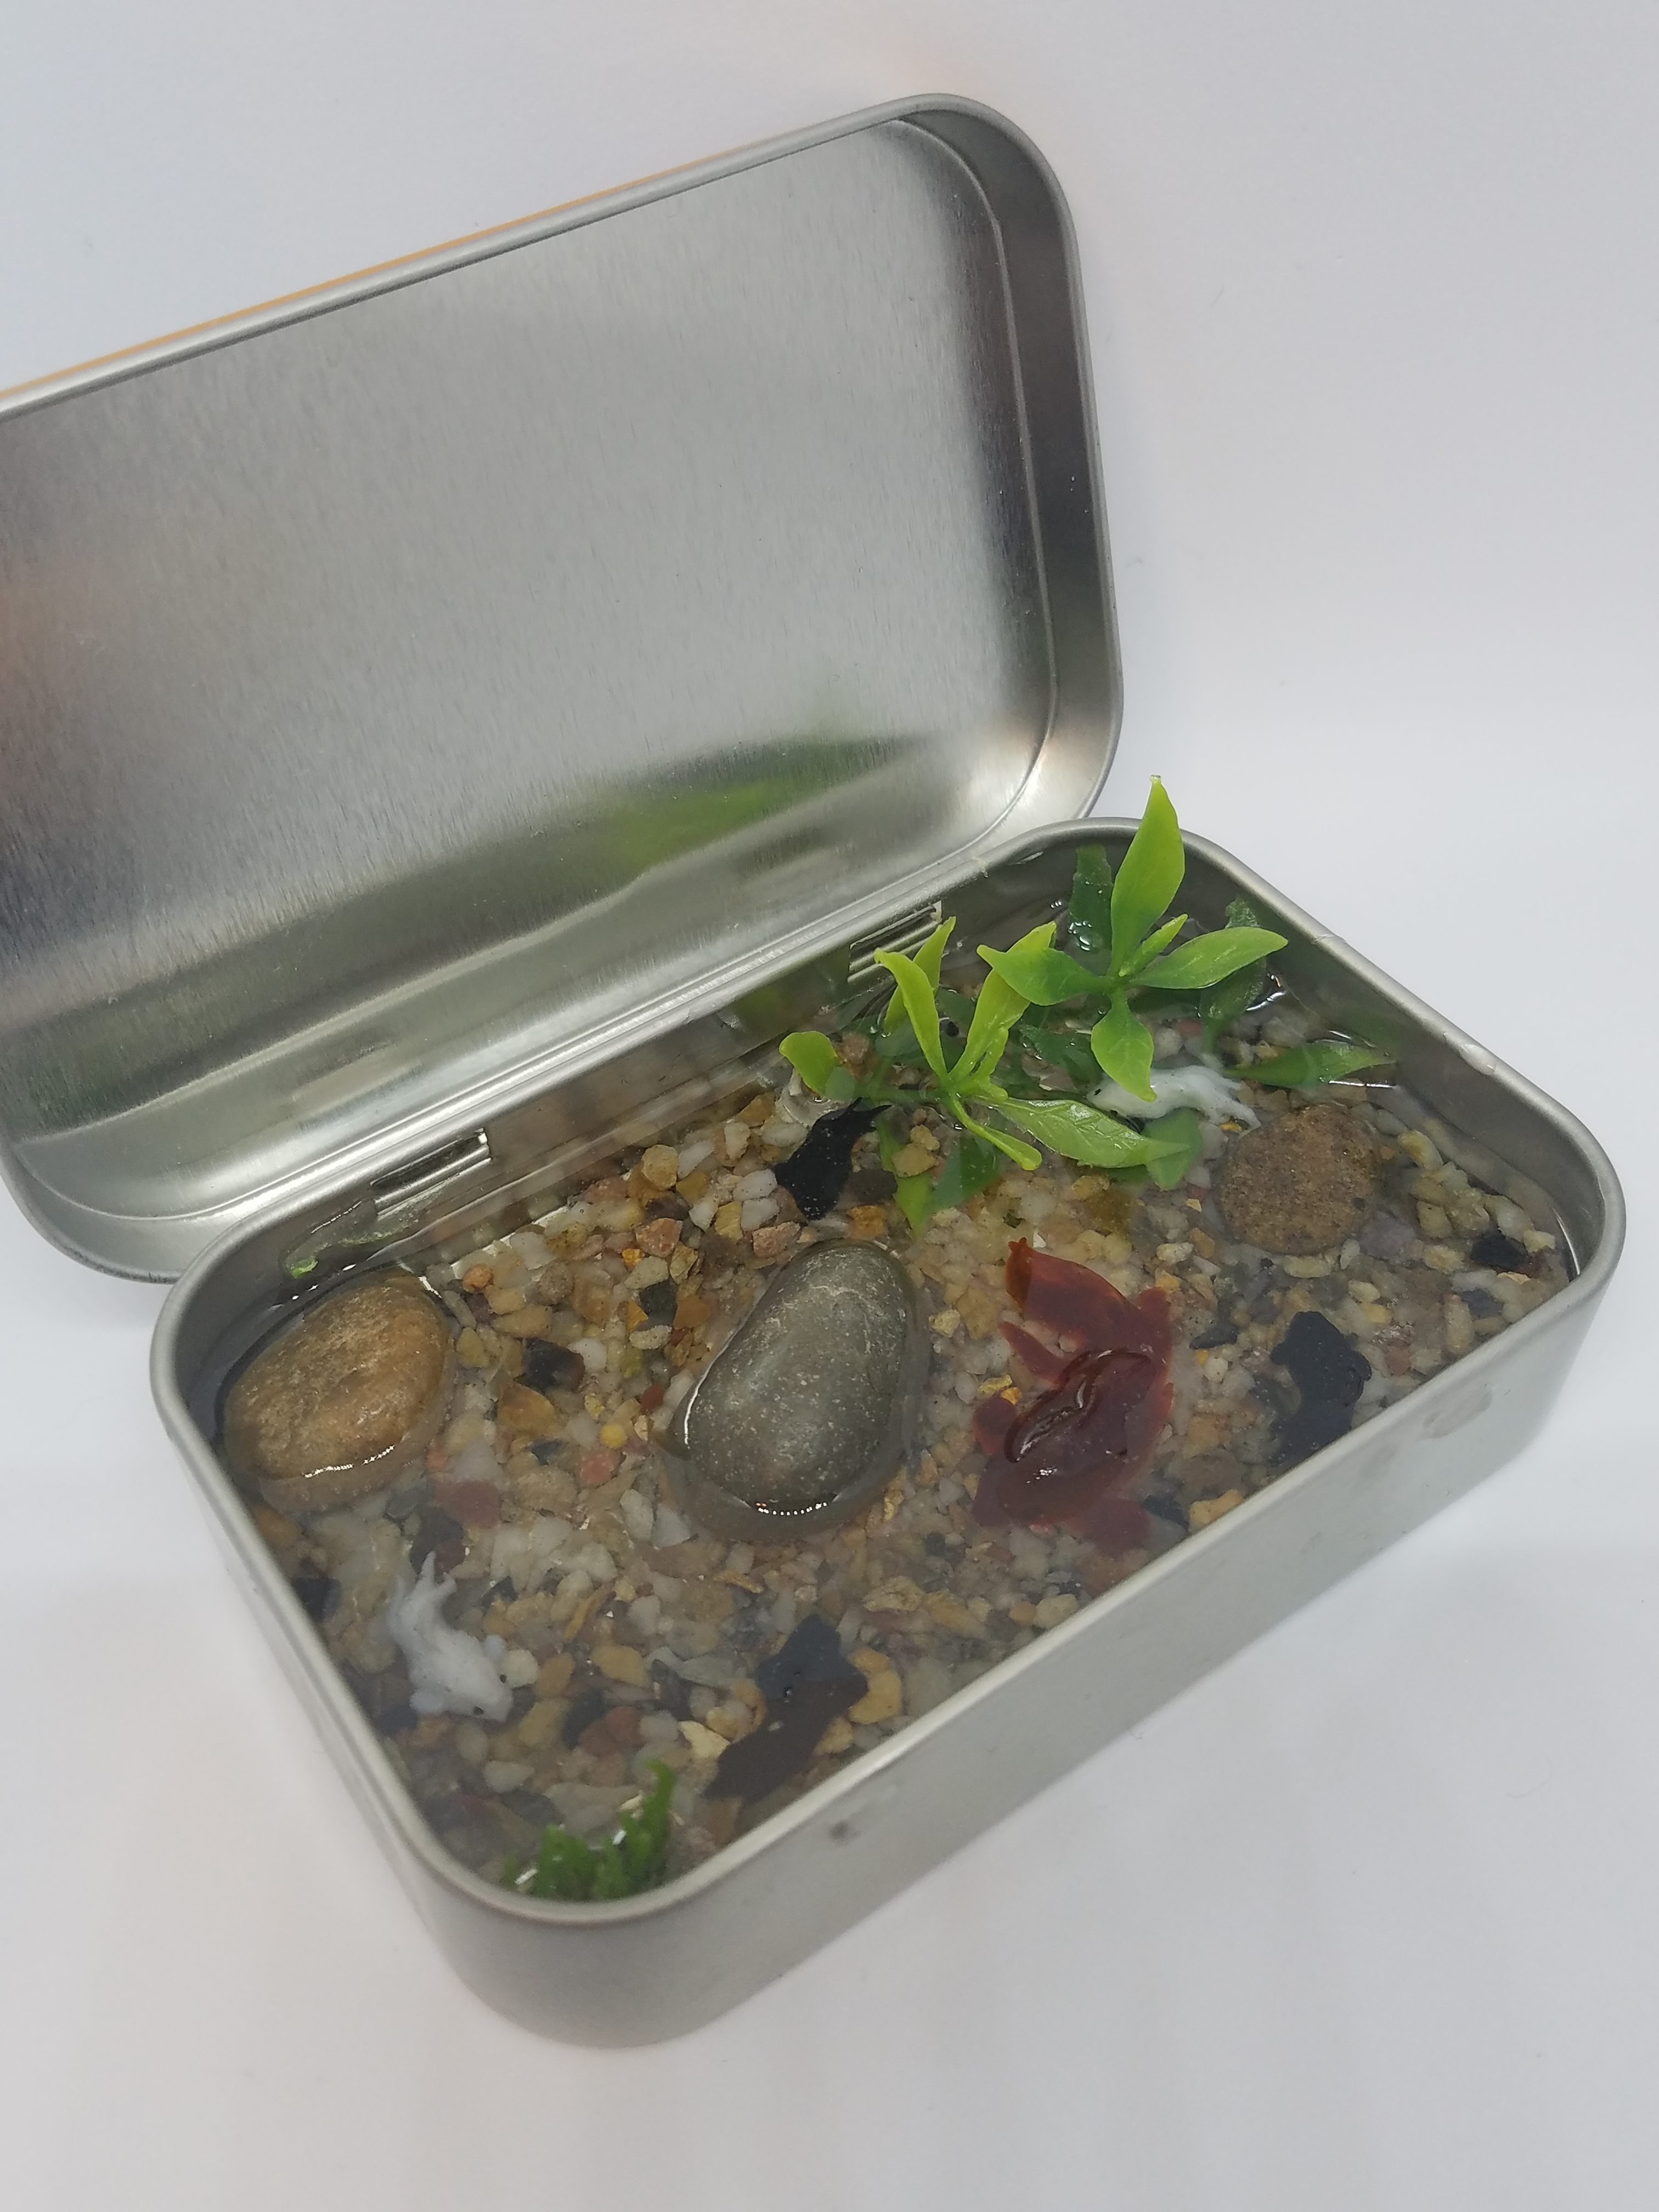 Mini koi pond inside a mint tin made from resin